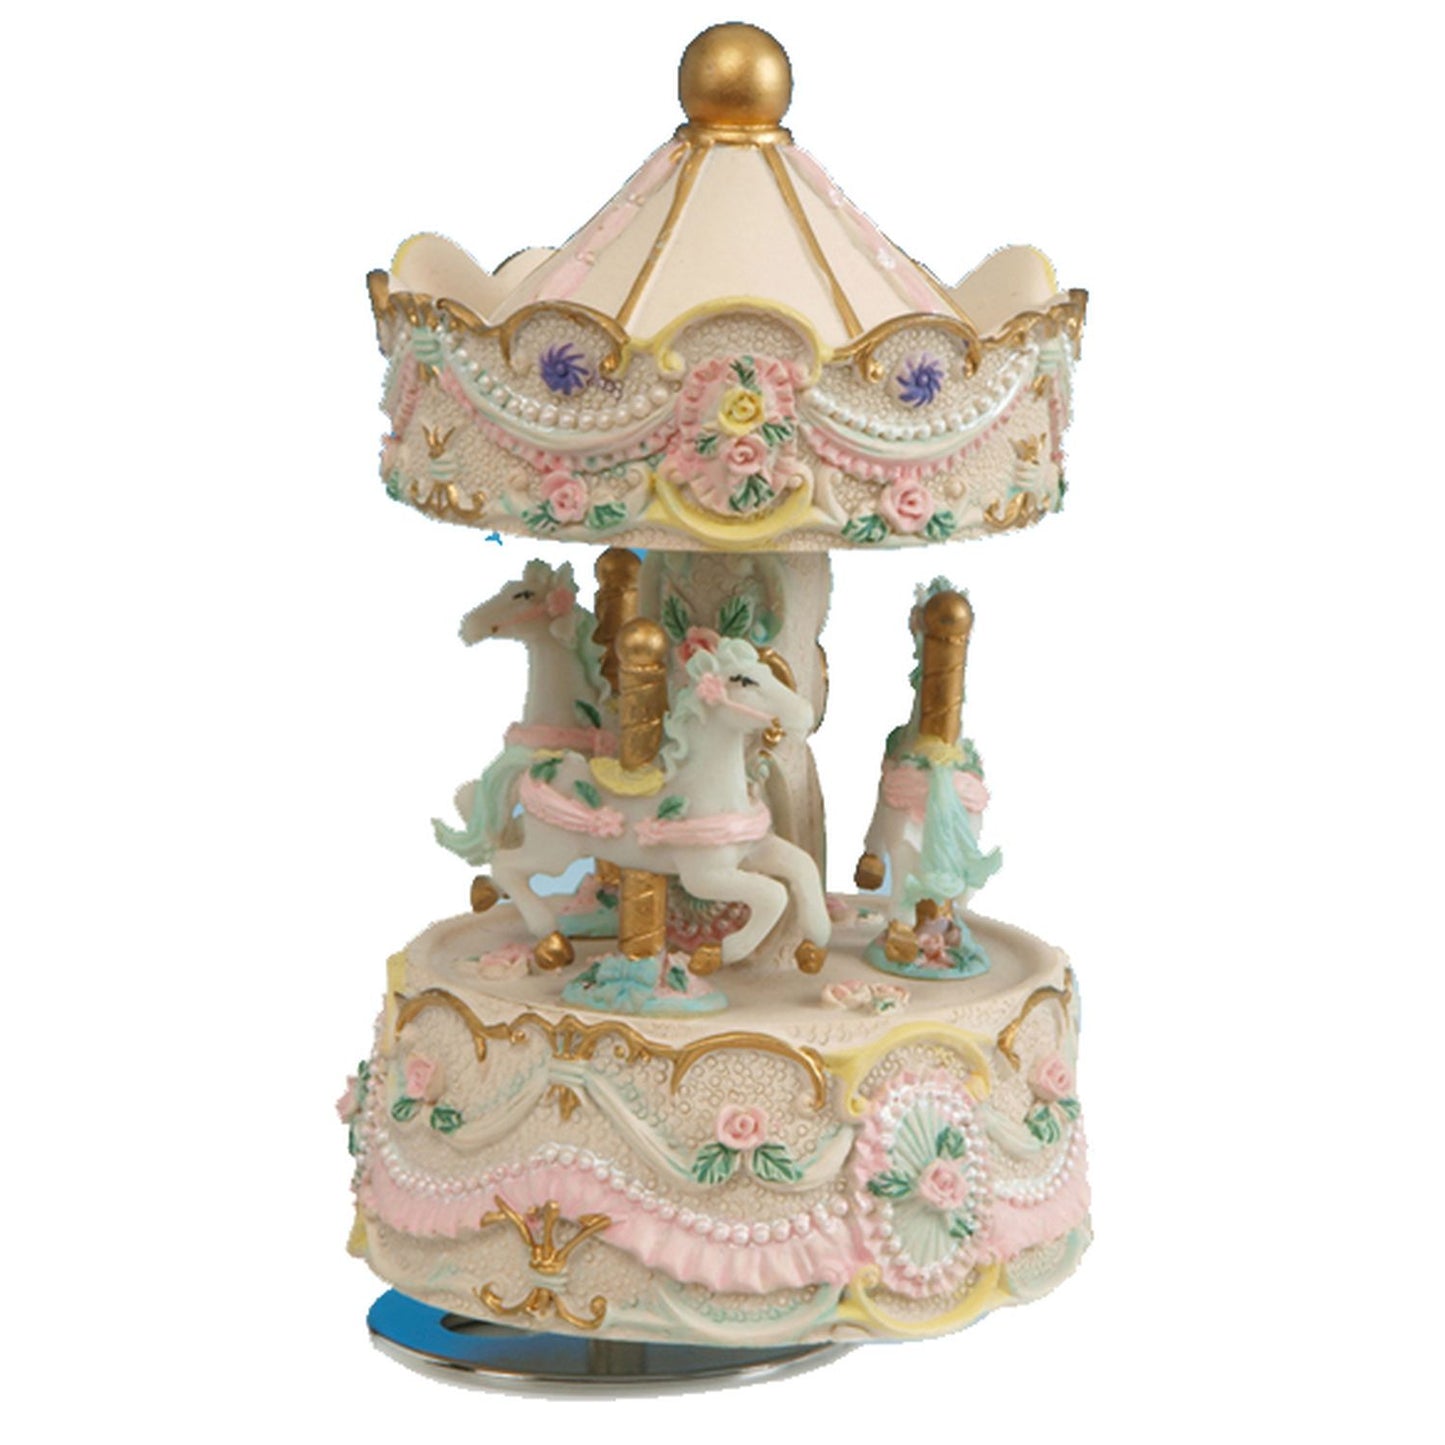 Musicbox Kingdom 5.5" Beige Carousel Made Of Polystone, Turns To A Famous Melody